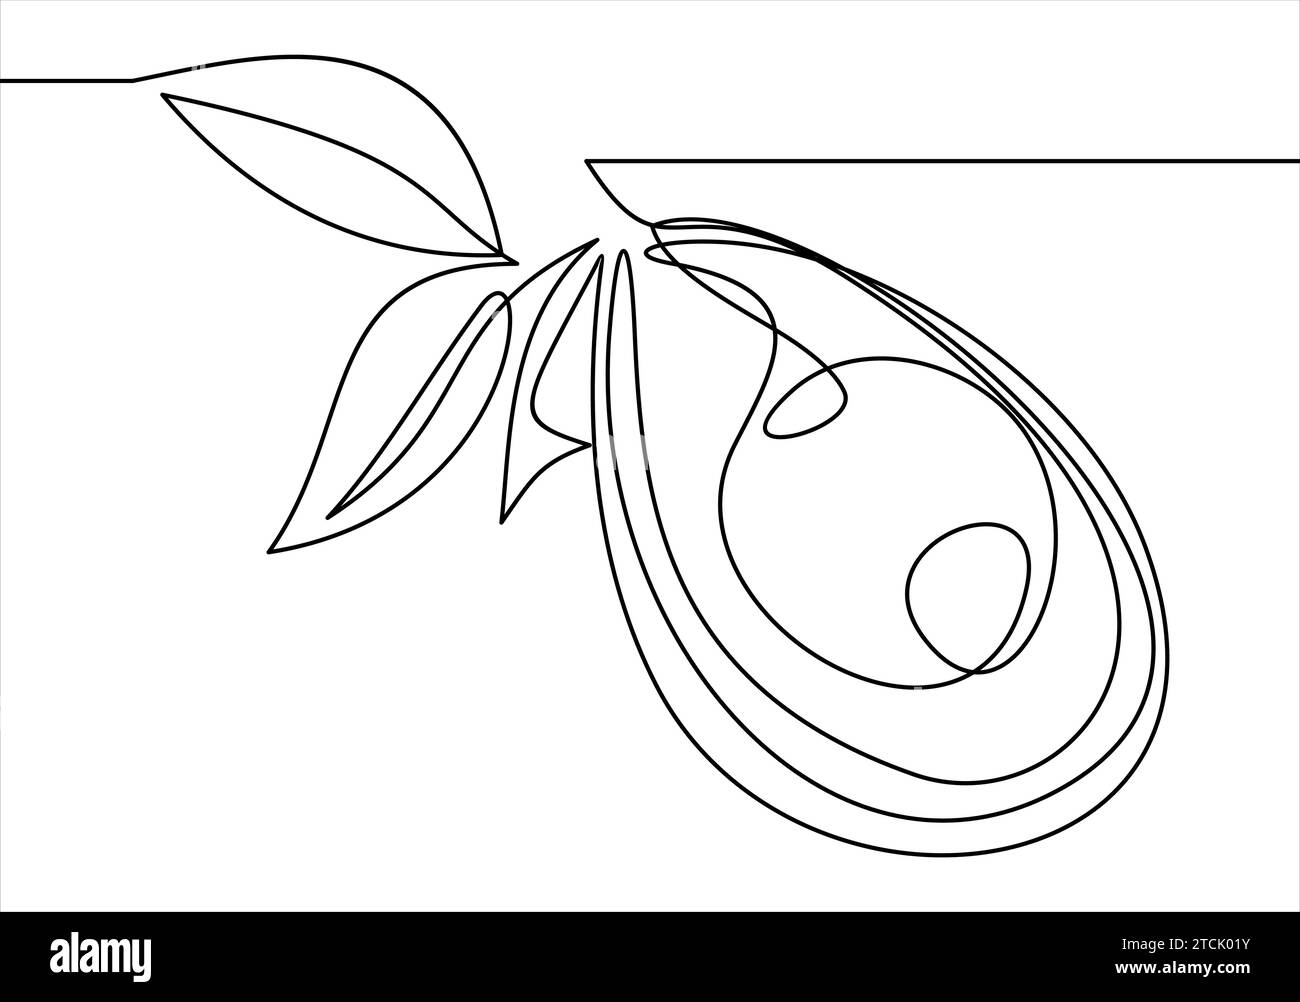 Continuous line drawing of avocado. illustration Stock Vector